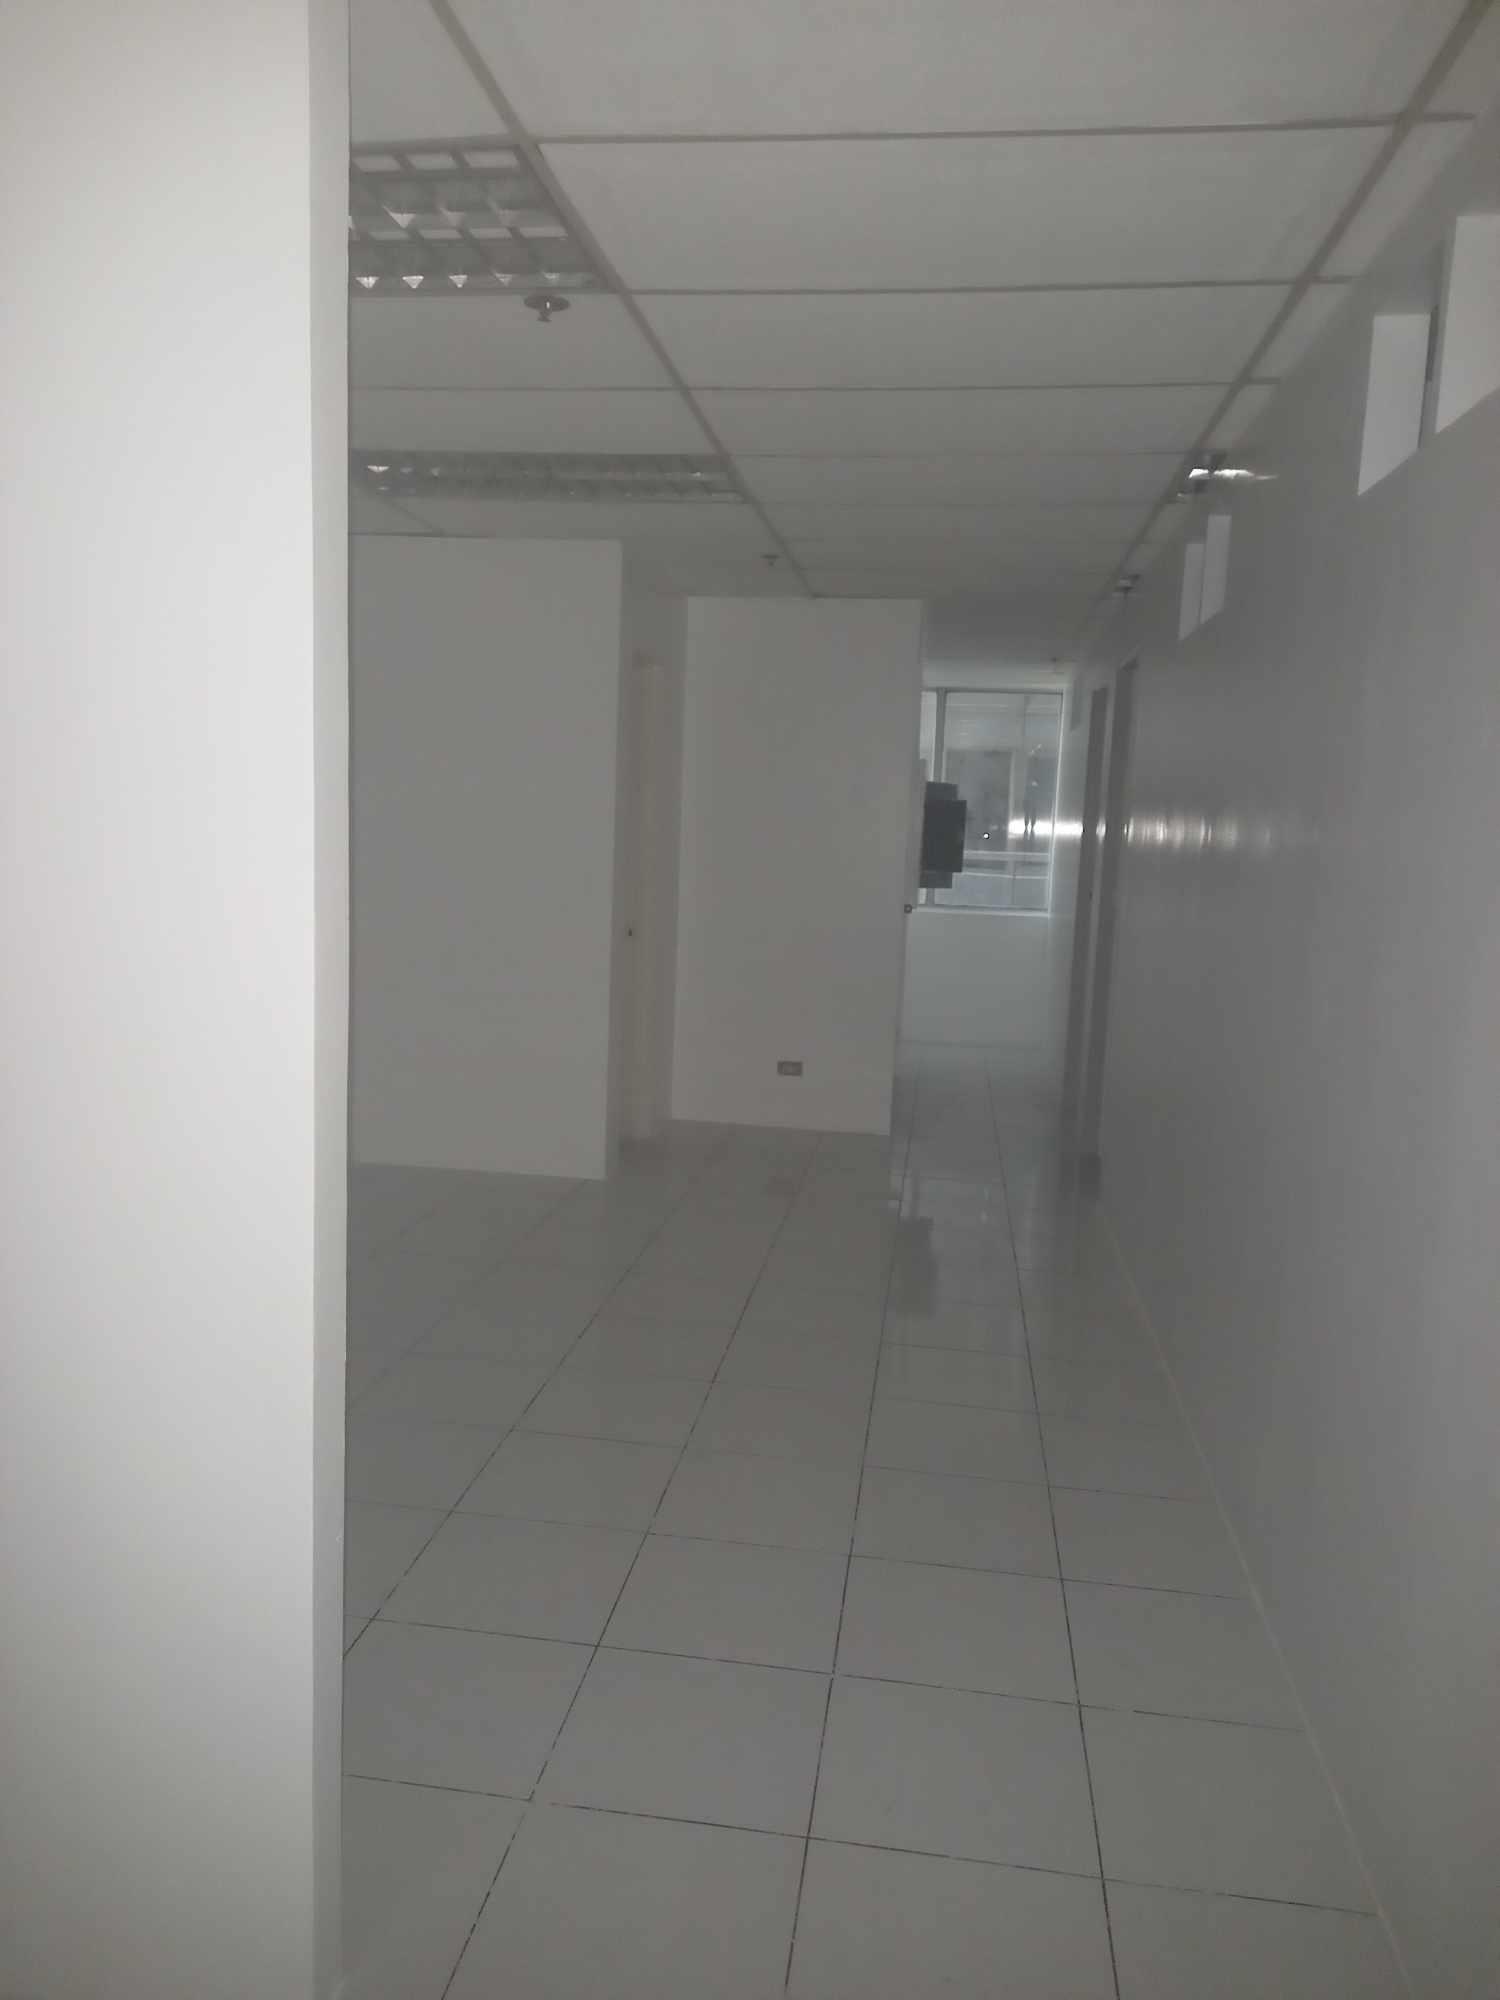 For Rent Lease Fitted 94 sqm Office Space Ortigas Center